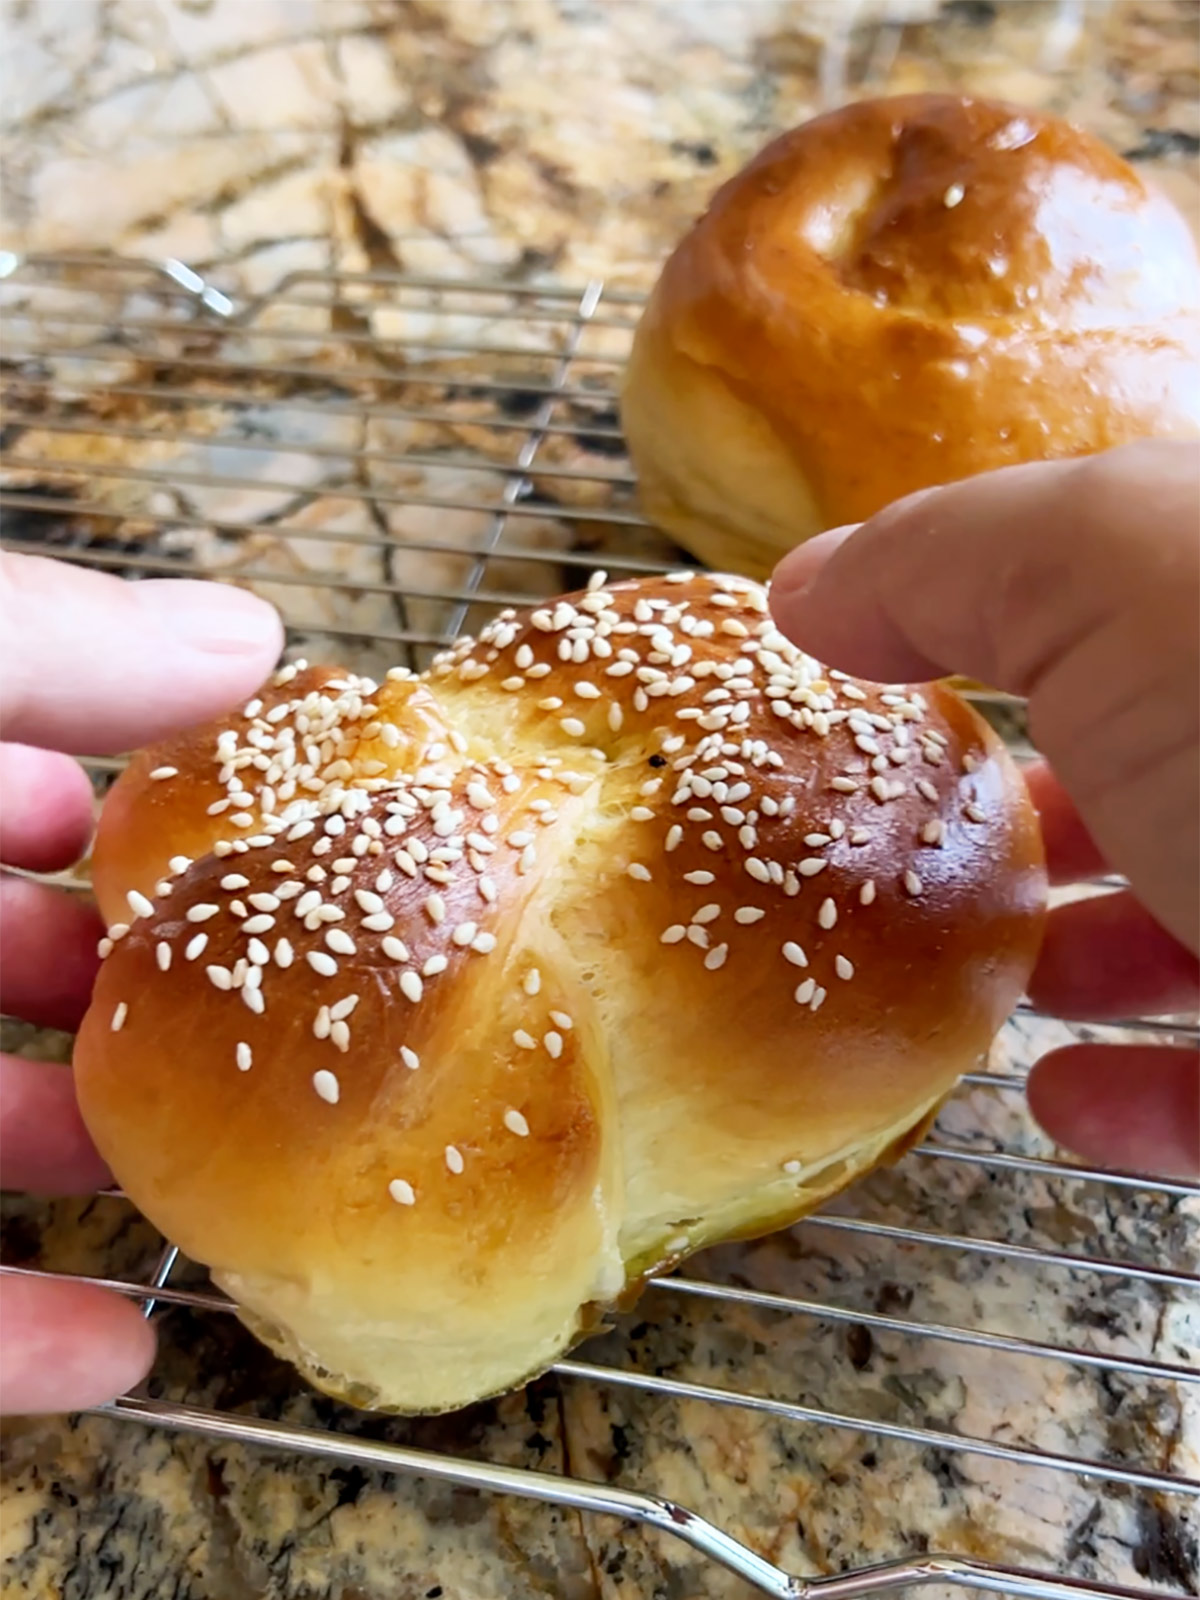 Two hands about to pick up a knotted baked challah roll with a round challah roll in the background.